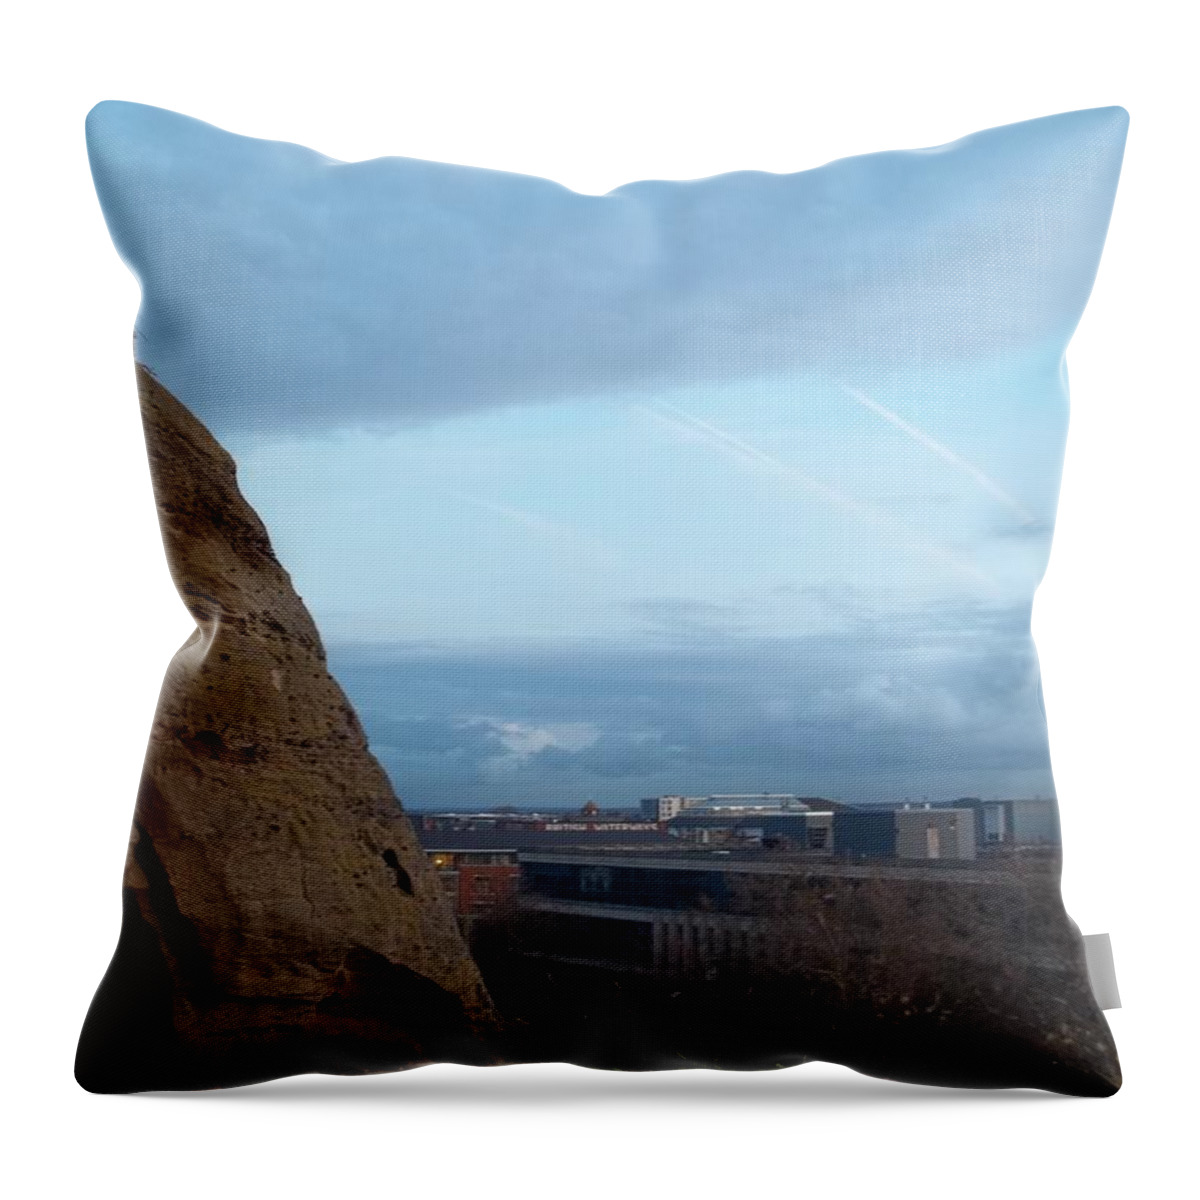 Nottingham Throw Pillow featuring the photograph Nottingham From The Castle Caves by James Potts